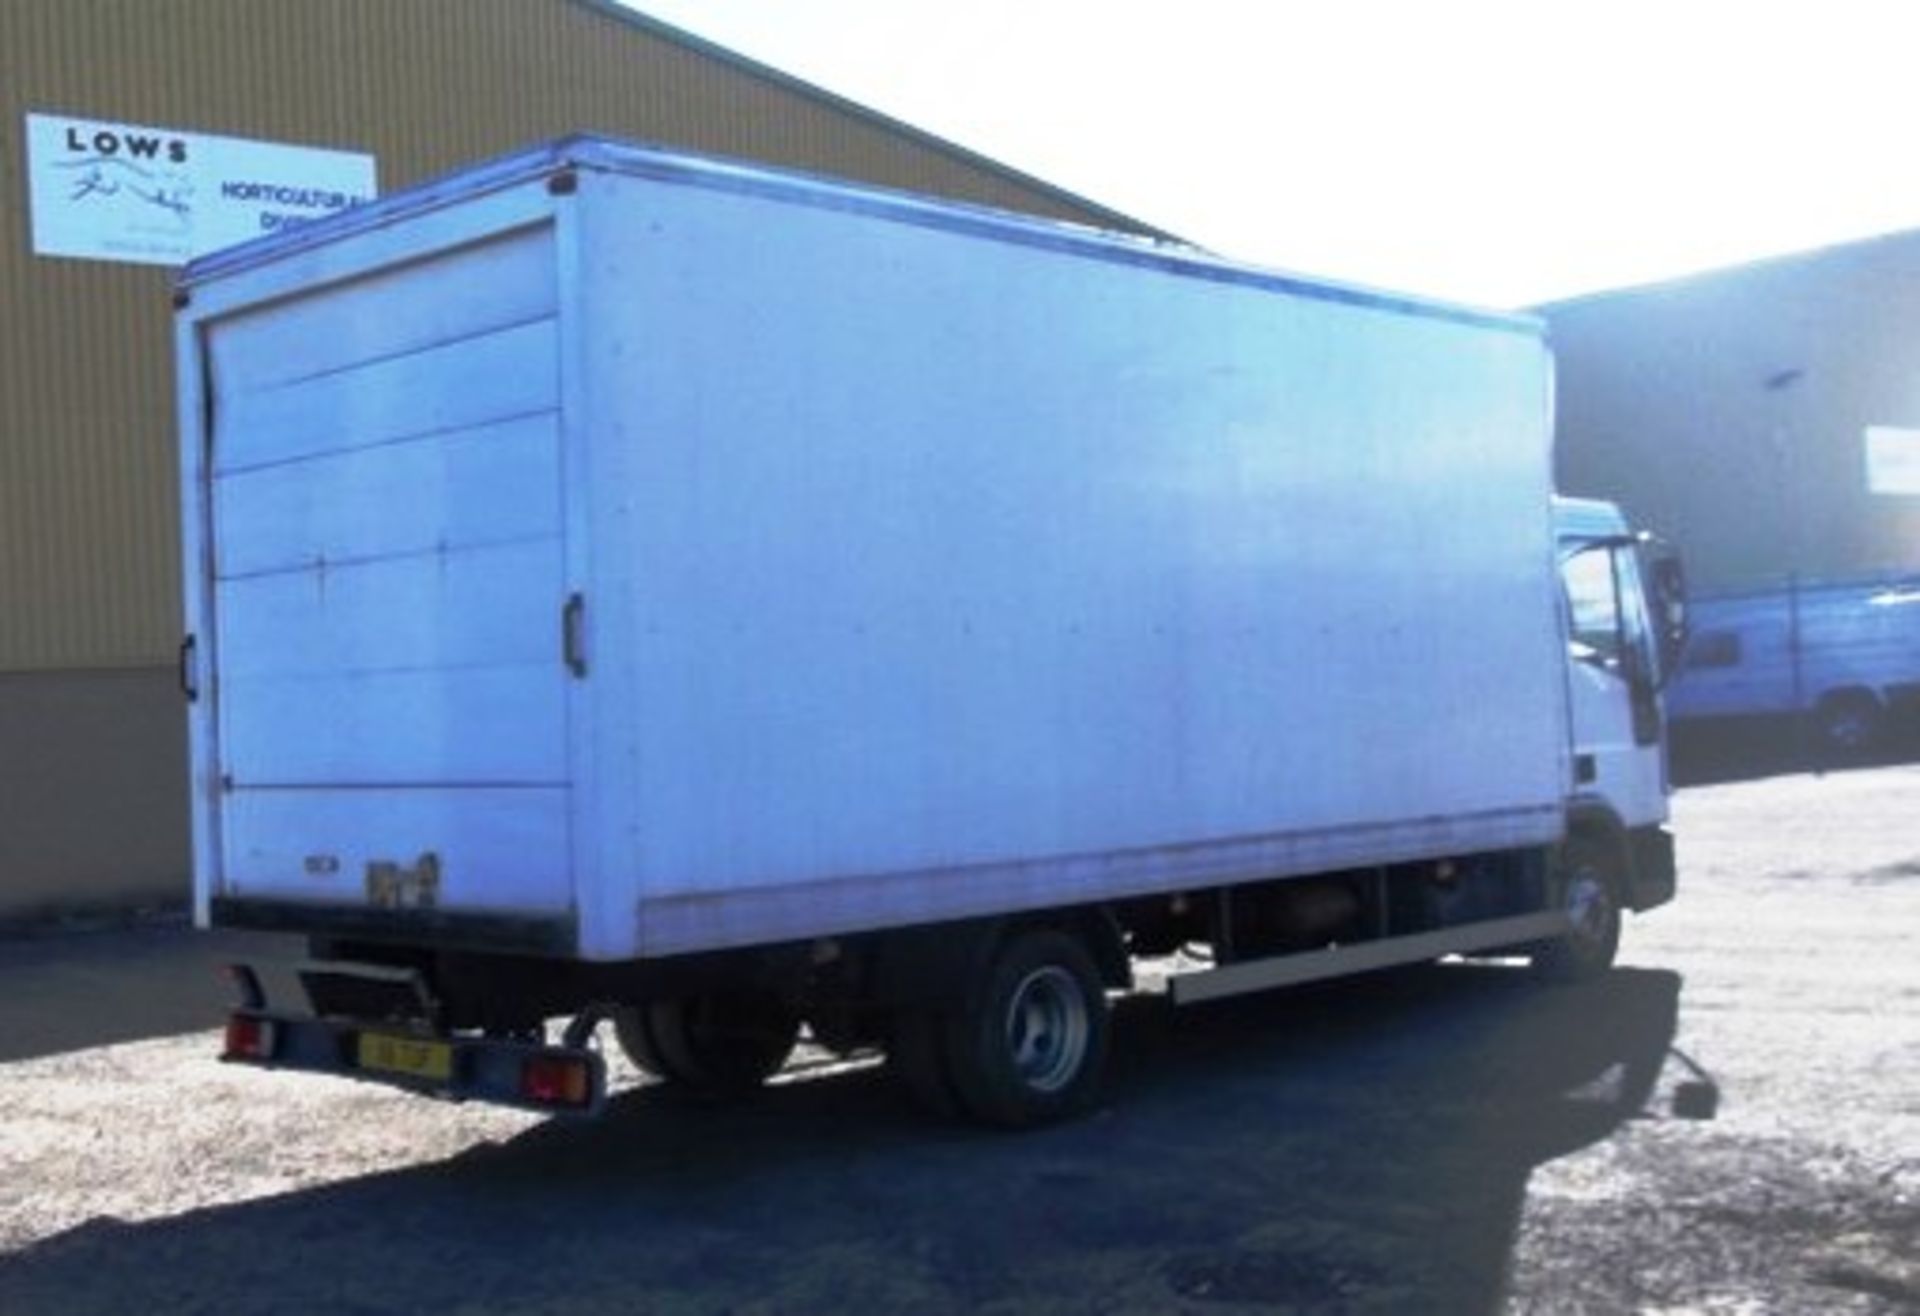 IVECO-FORD CARGO TECTOR - 3920cc
Body: 2 Dr Van
Color: White
First Reg: 05/03/2004
Doors: 2
MOT: - Image 6 of 10